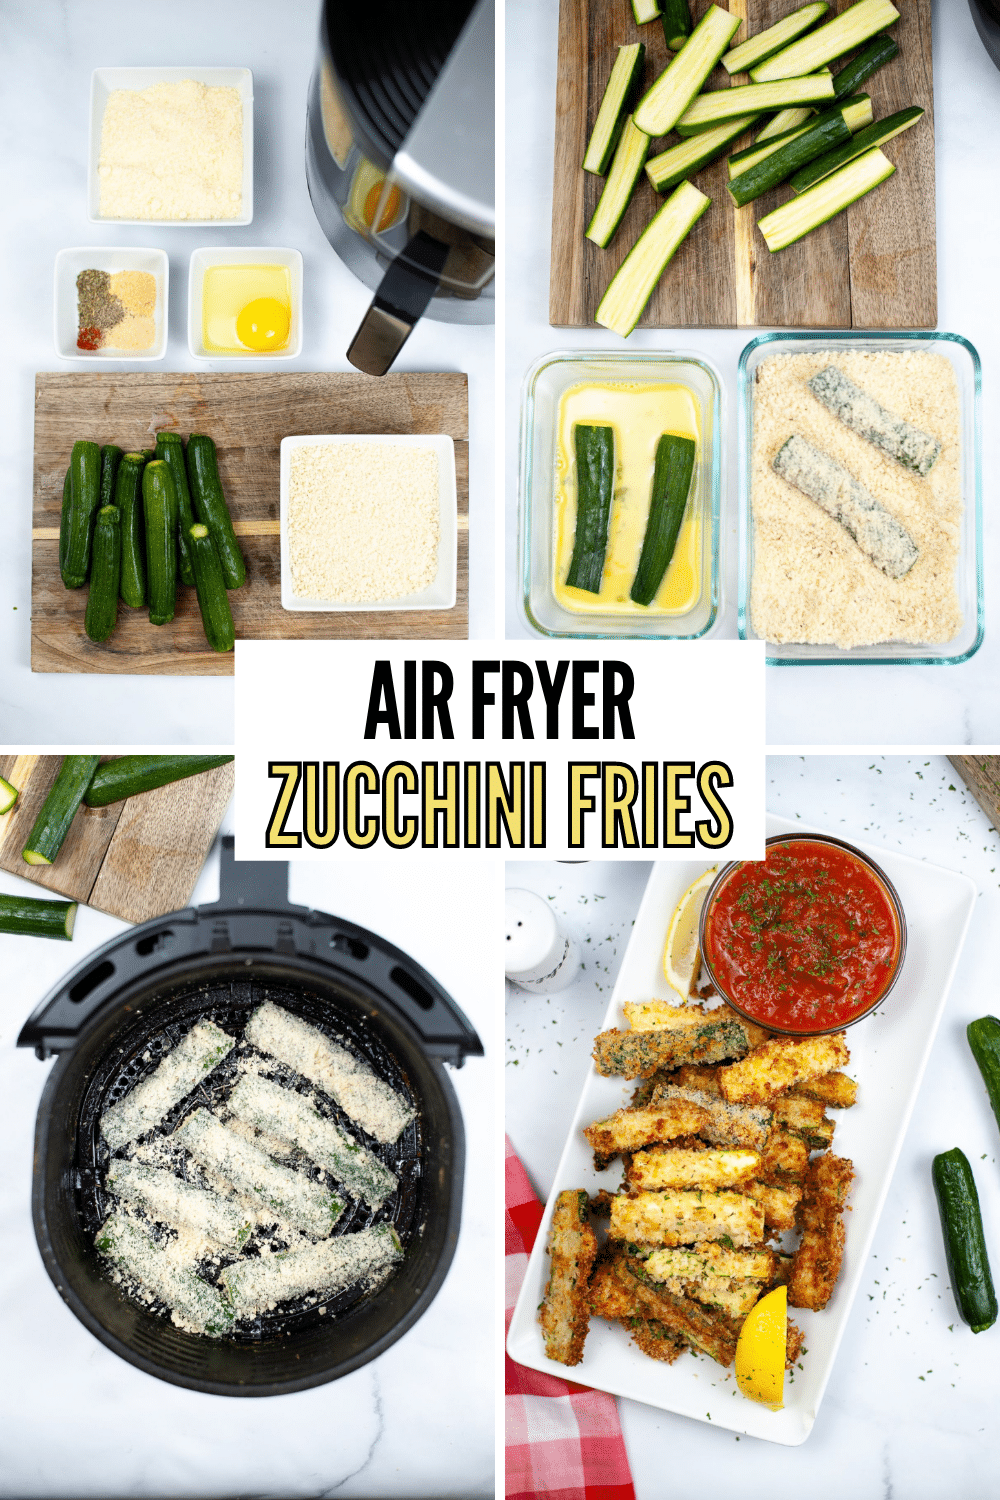 Air Fryer Zucchini Fries are light and crispy and full of fresh flavor. They're an amazingly delicious, flavorful and healthy snack! #airfryer #zucchinifries #zucchini #fries #healthysnack via @wondermomwannab